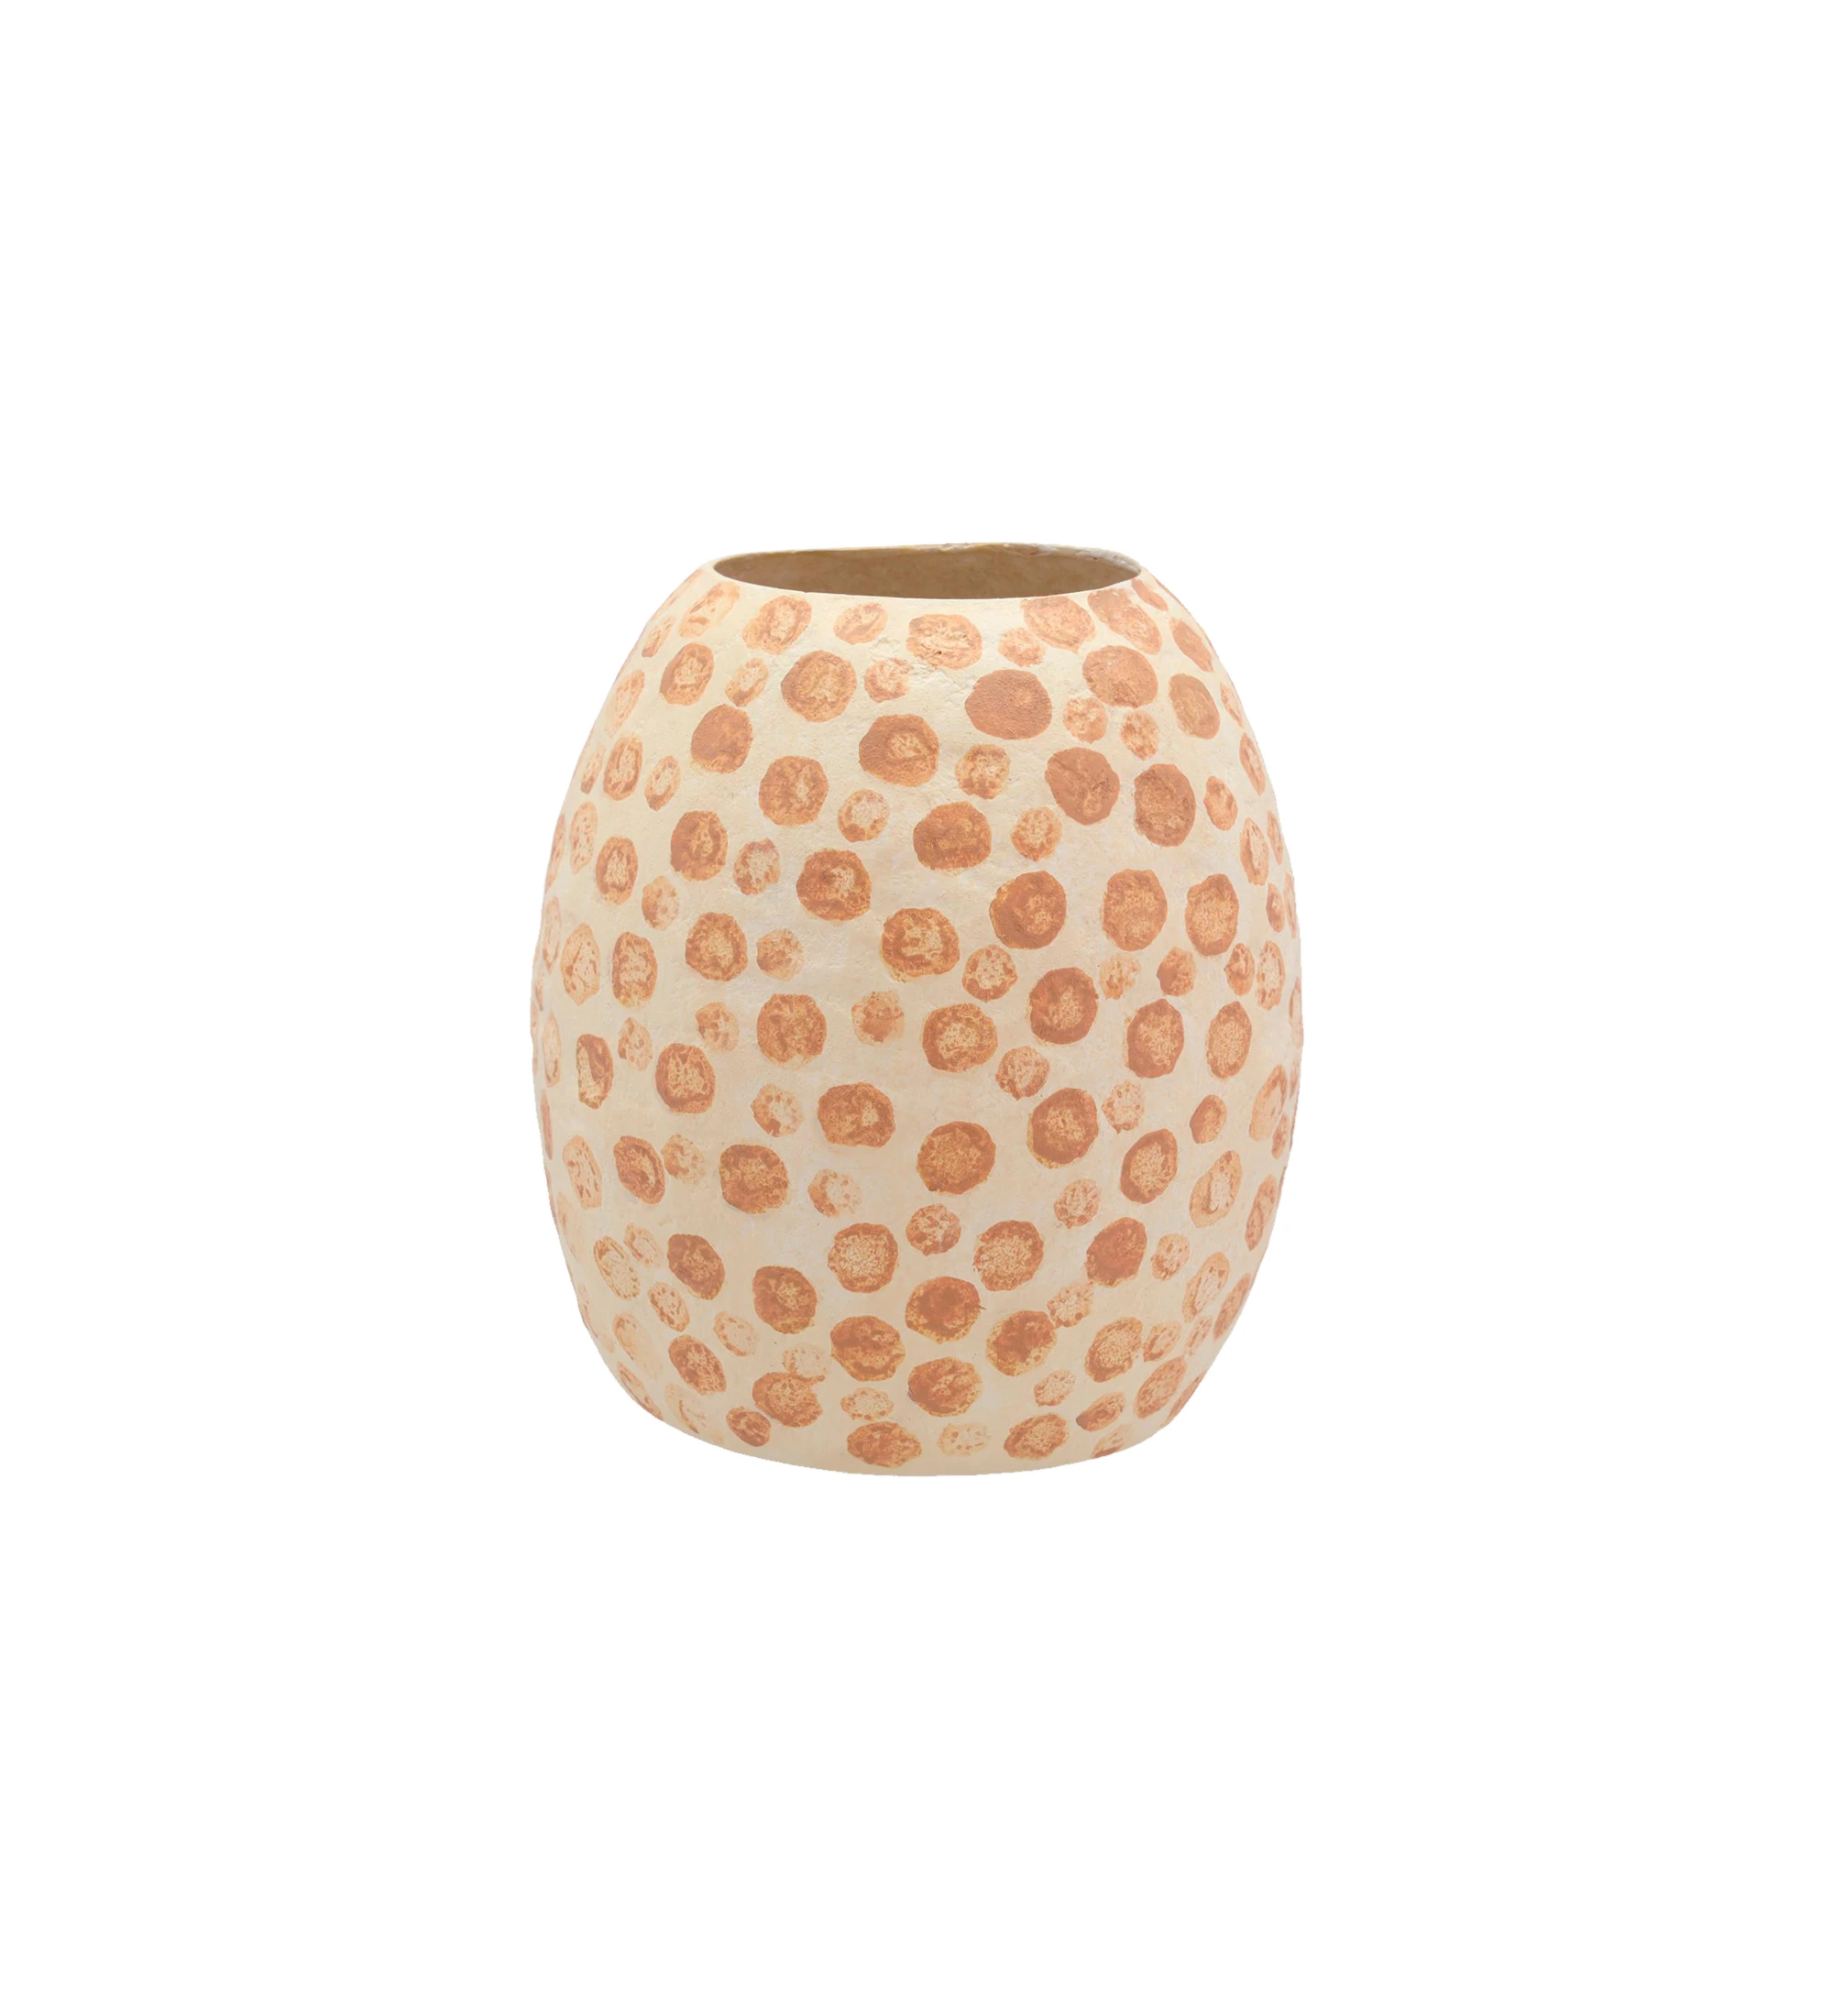 Handmade vase in cream papier-mâché with nougat-colored polka dots.